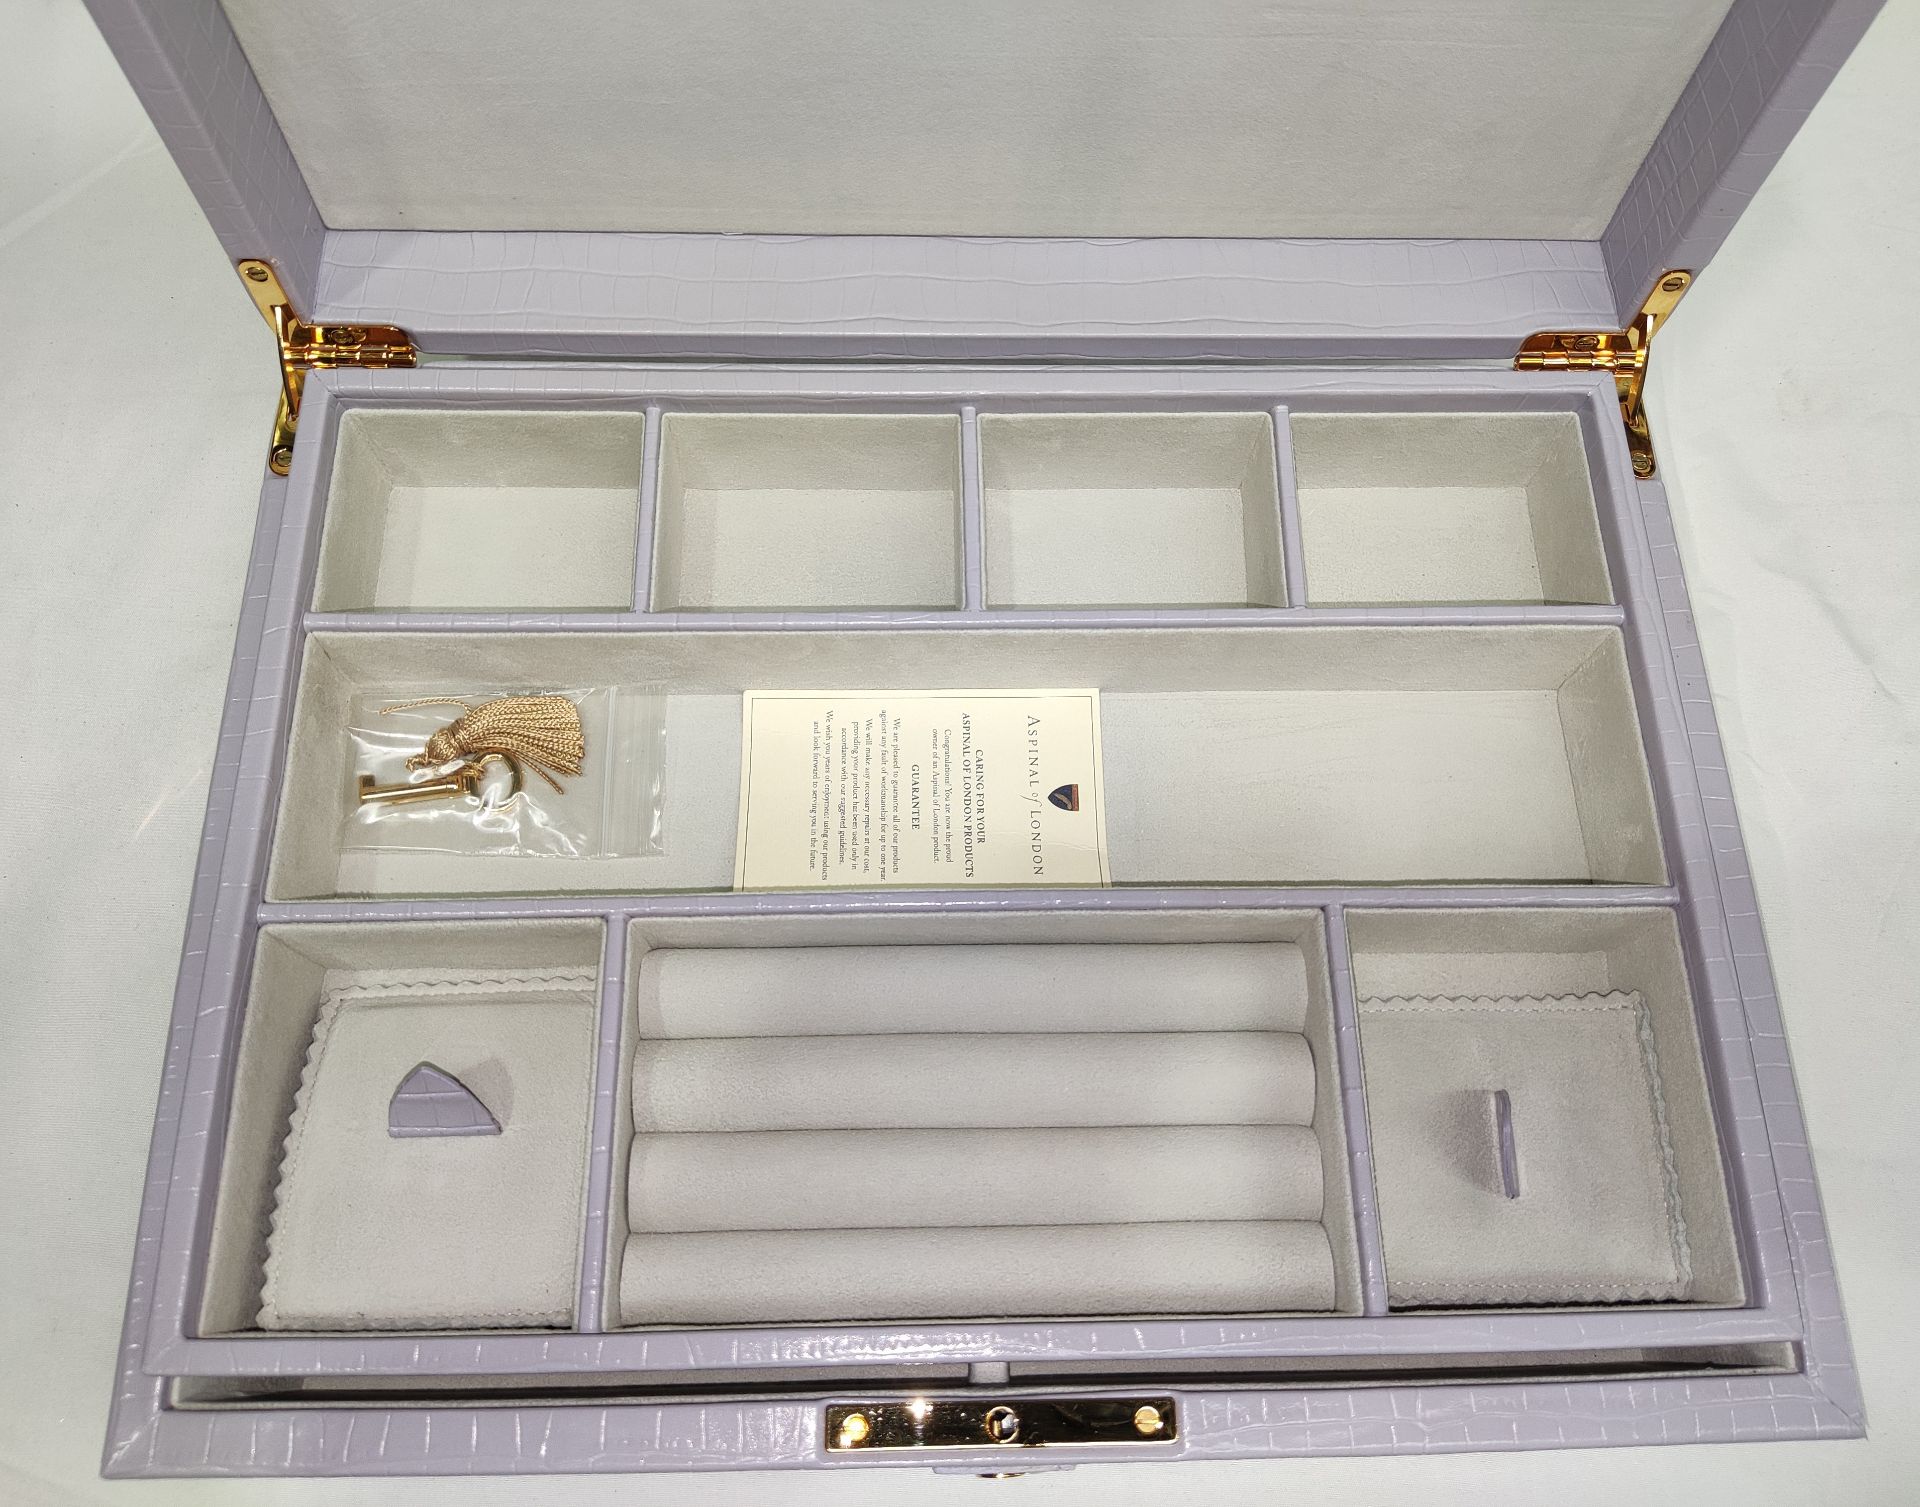 1 x ASPINAL OF LONDON Grand Luxe Jewellery Case In Deep Shine English Lavender Croc - Original - Image 24 of 34